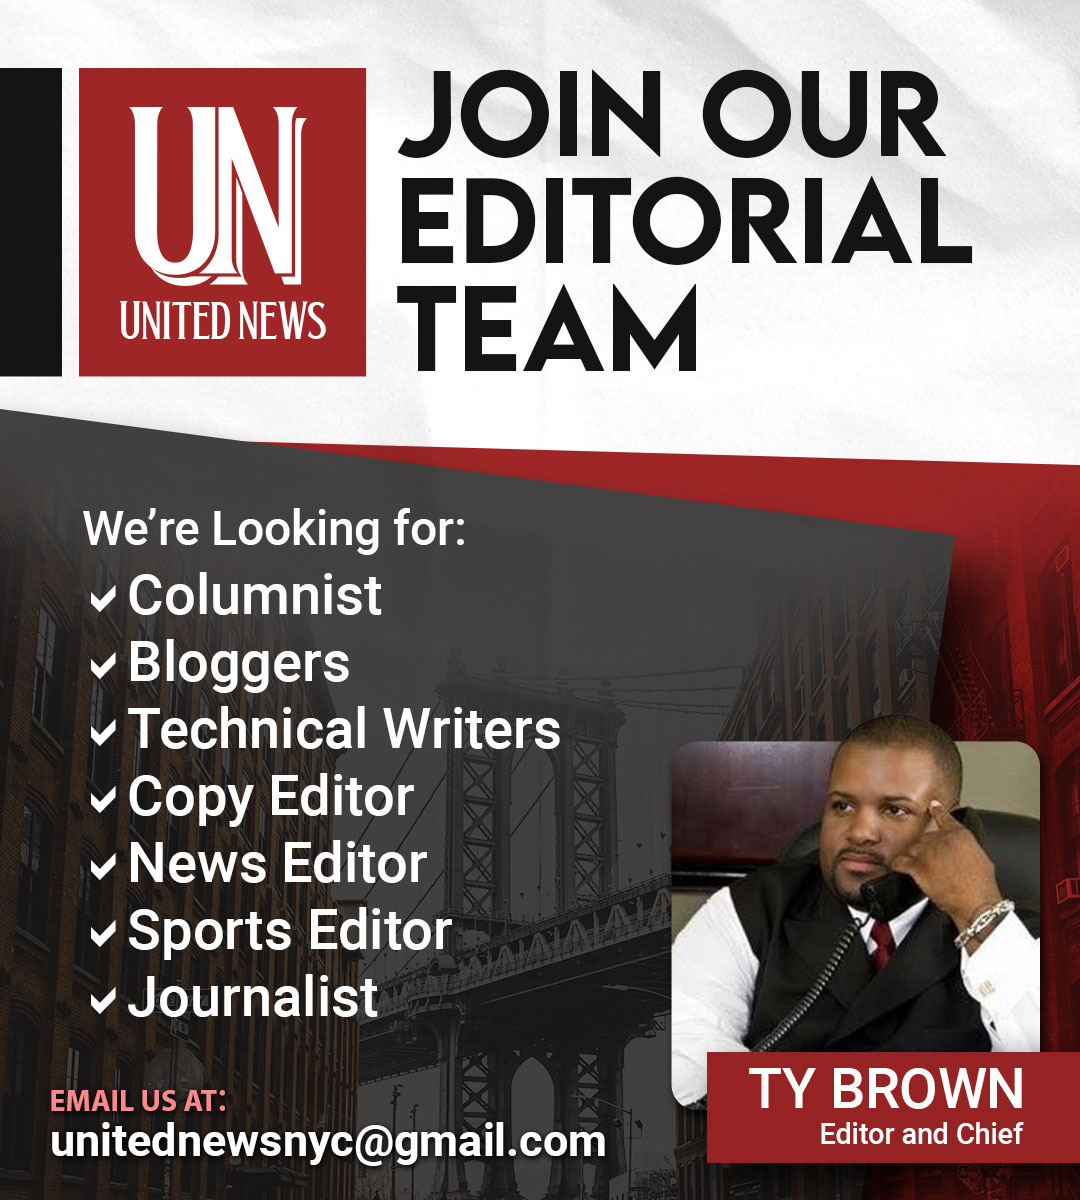 Join the United News Editorial Team and be part of a dynamic group of writers, editors, and journalist. Come and Join our team! ✨🌟
Email Us: unitednewsnyc@gmail.com
#JoinUsGrowWithUs #UnitedNews #NewsUpdate #newsupdate #hiring #hiringnow #hiring2023 #hiringalert #nowhiring